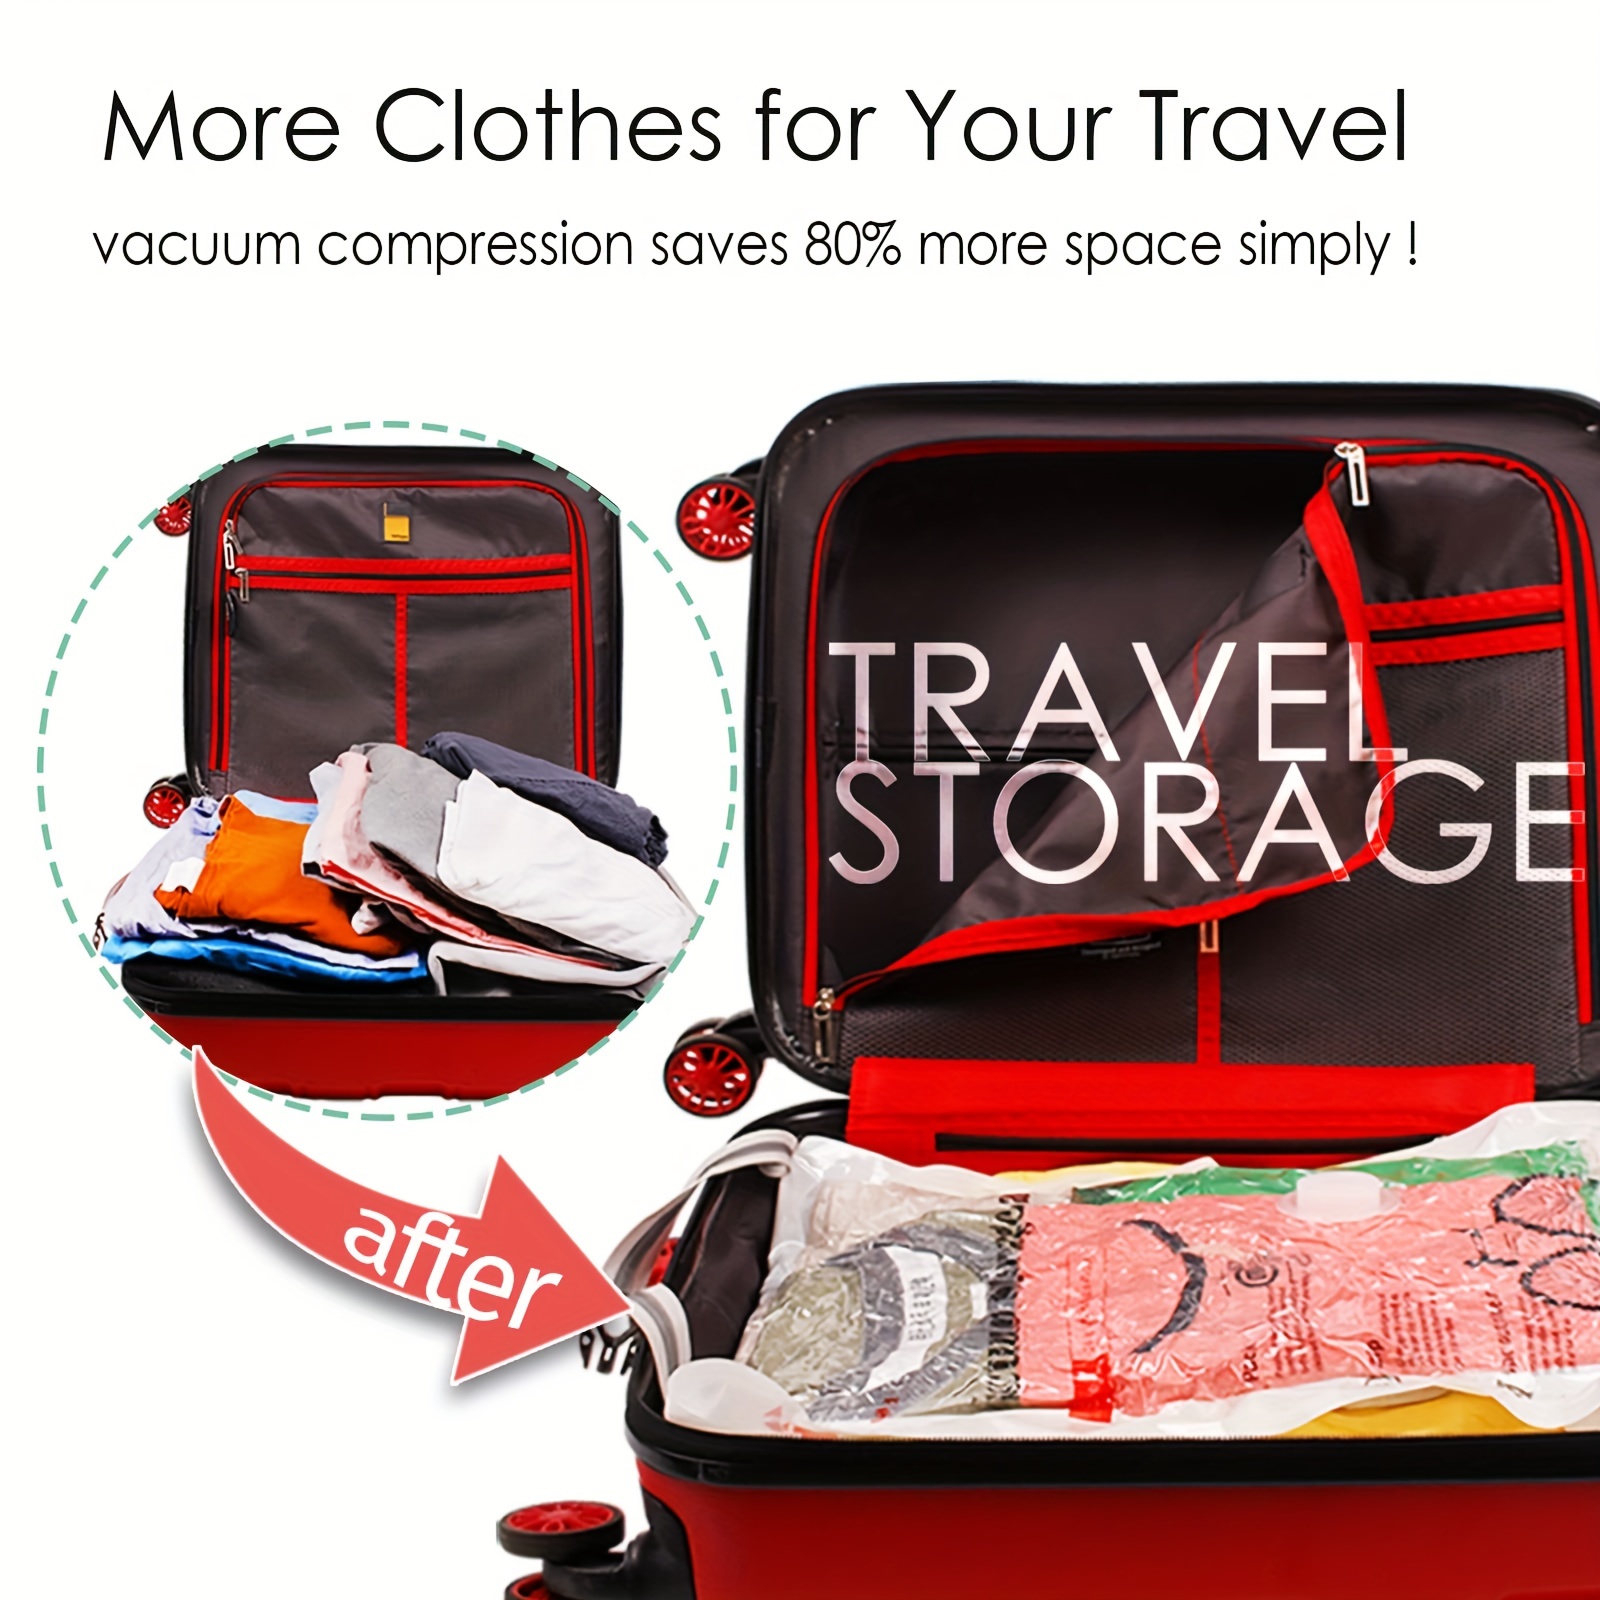 Vacuum Storage Bag For Home Use - A Space Saving Solution For Storing  Blankets, Clothing, And Bedding. This Compression Bag Comes With A Built-in  Electric Pump And Is Ideal For Travel Or